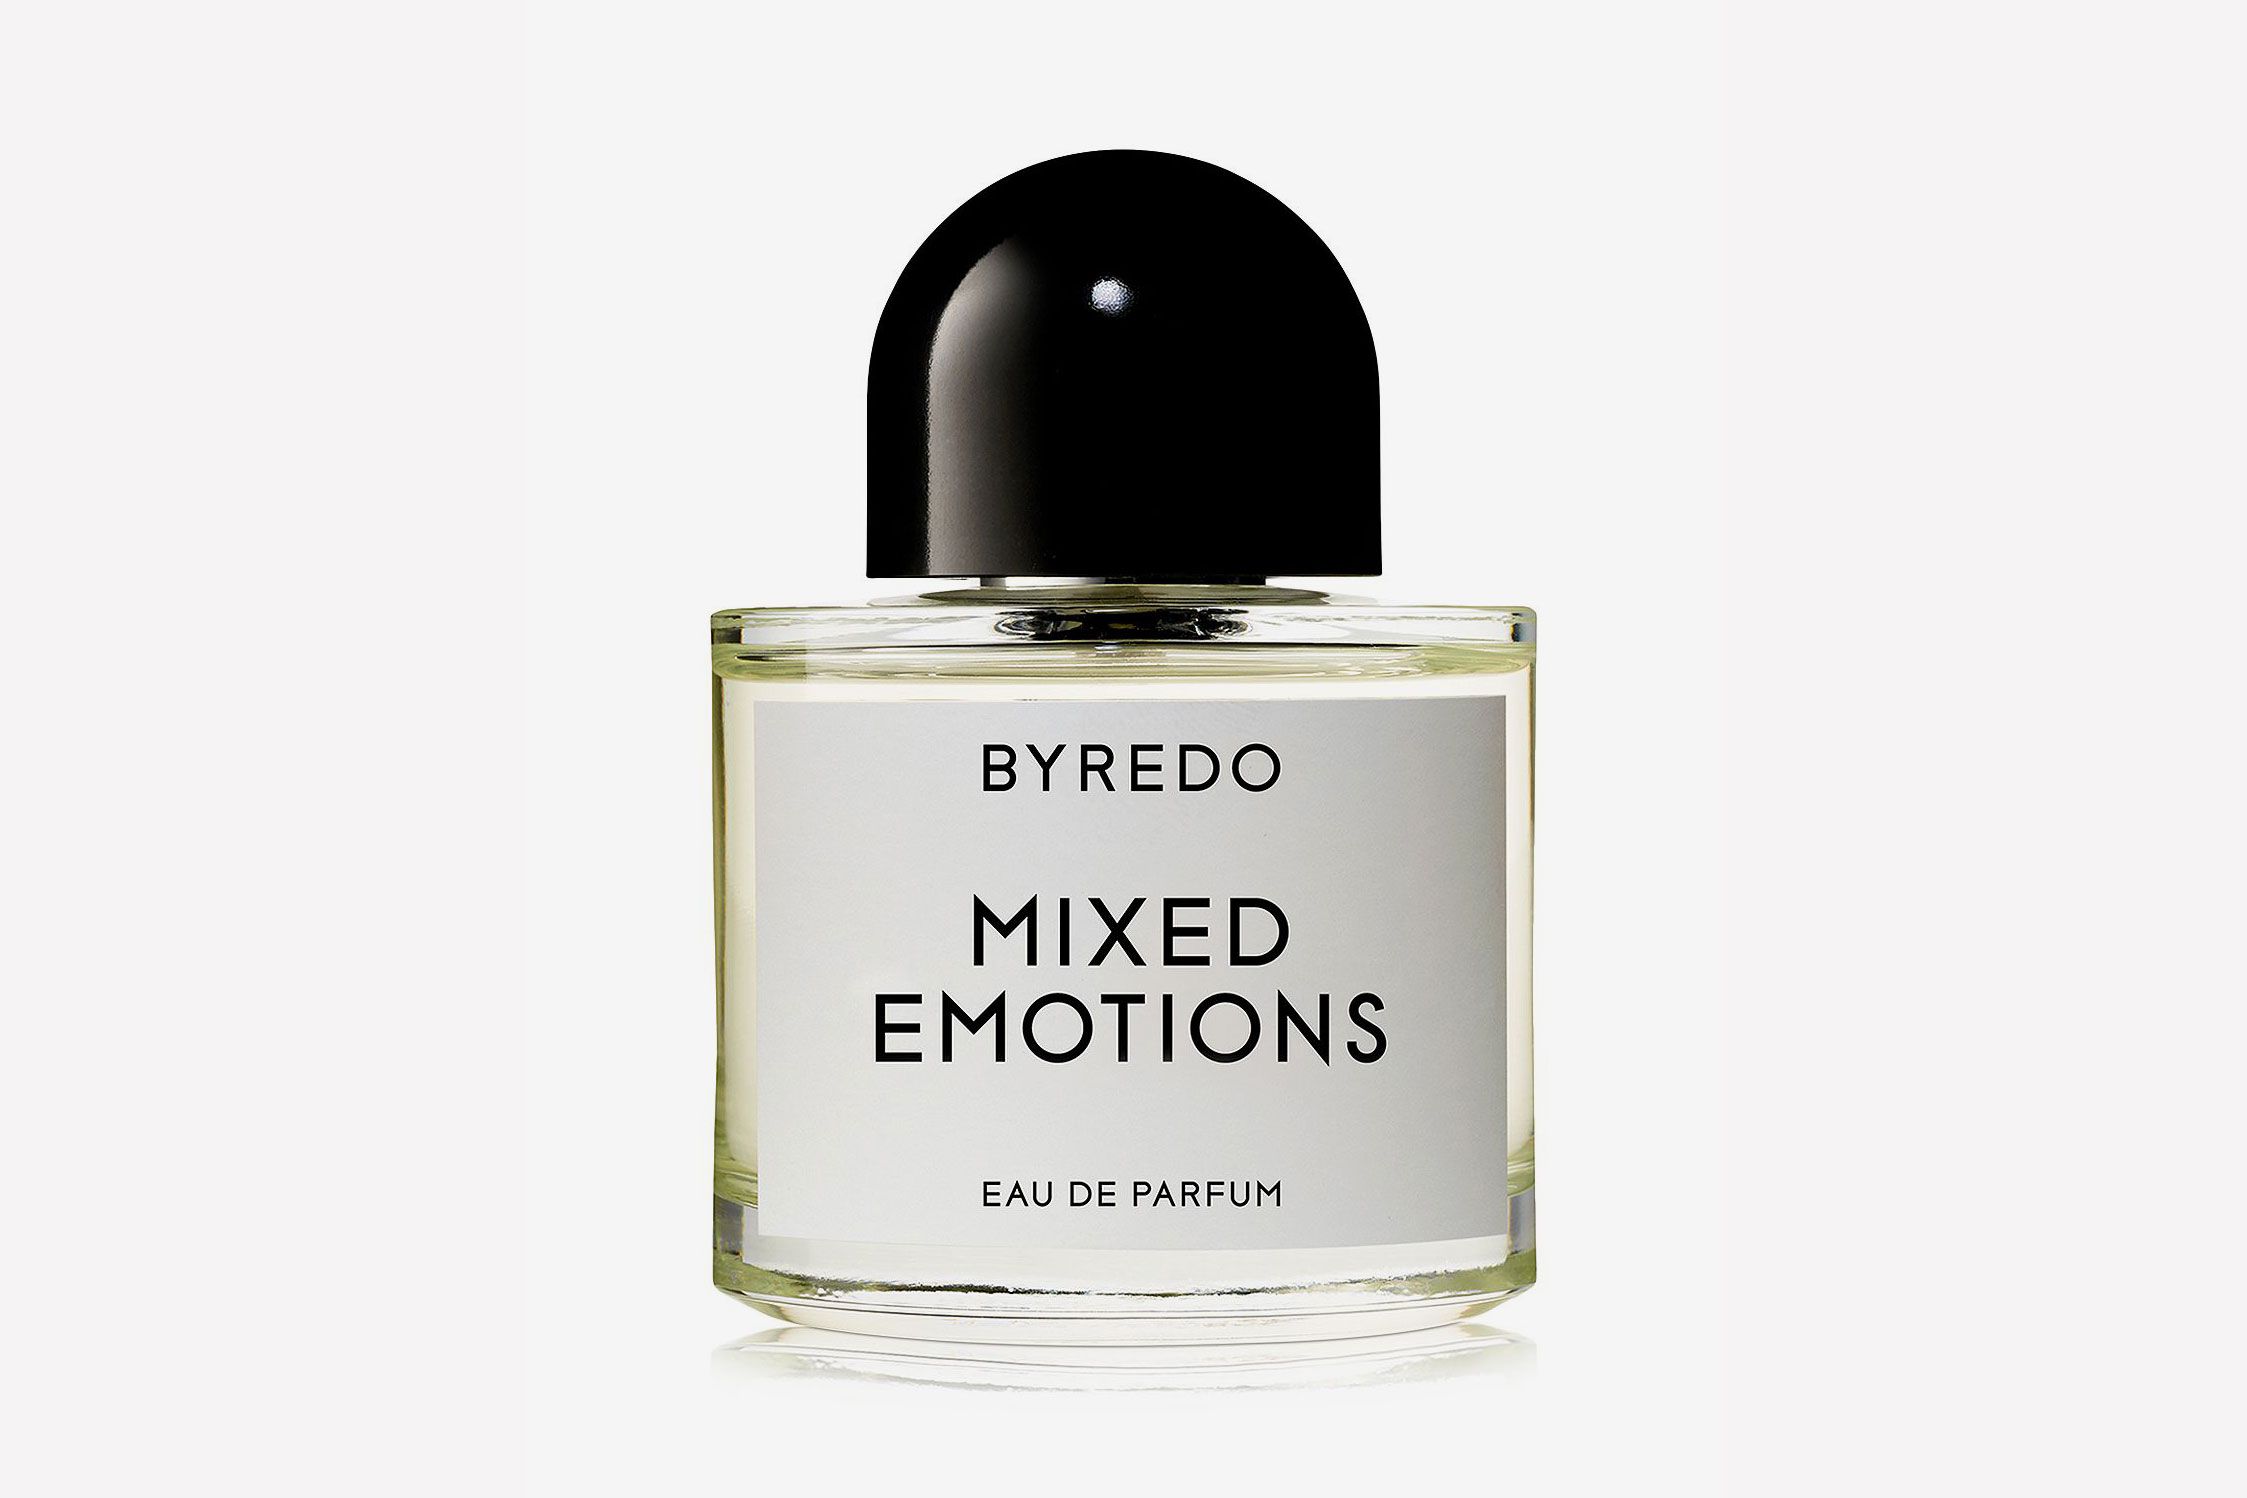 The 8 Best Spring Perfume Reviews 2021